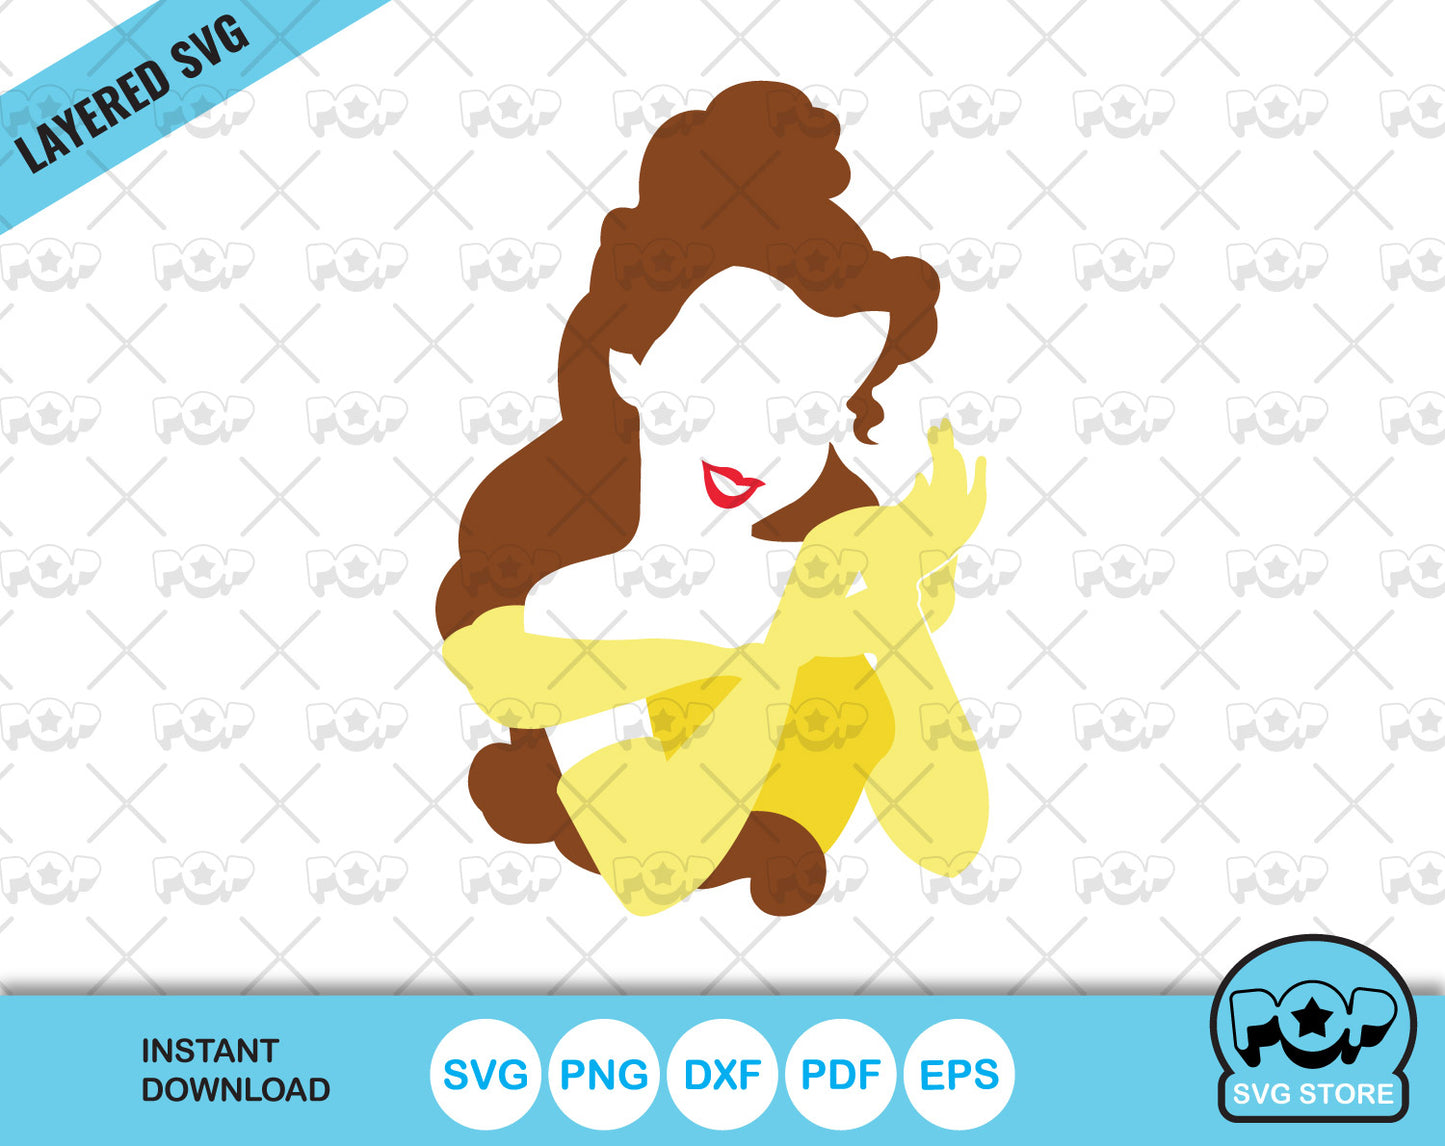 Princess Belle clipart, Beauty and the Beast SVG cutting files for cricut silhouette, SVG, PNG, DXF, instant download